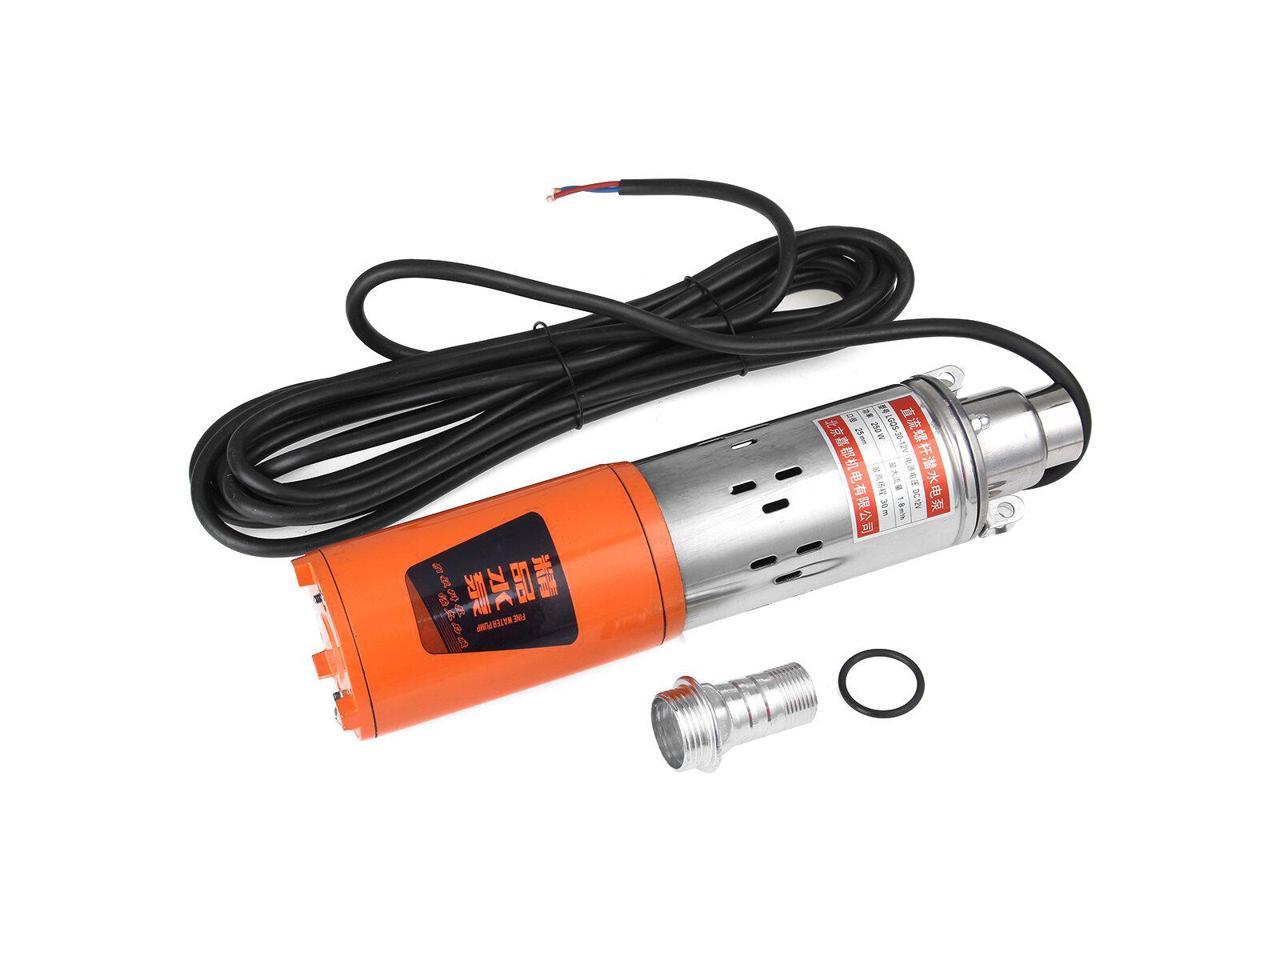 DC12V 1.2M³/H 30M Max Lift Deep Well Stainless+Cast Steel Submersible Water Pump 